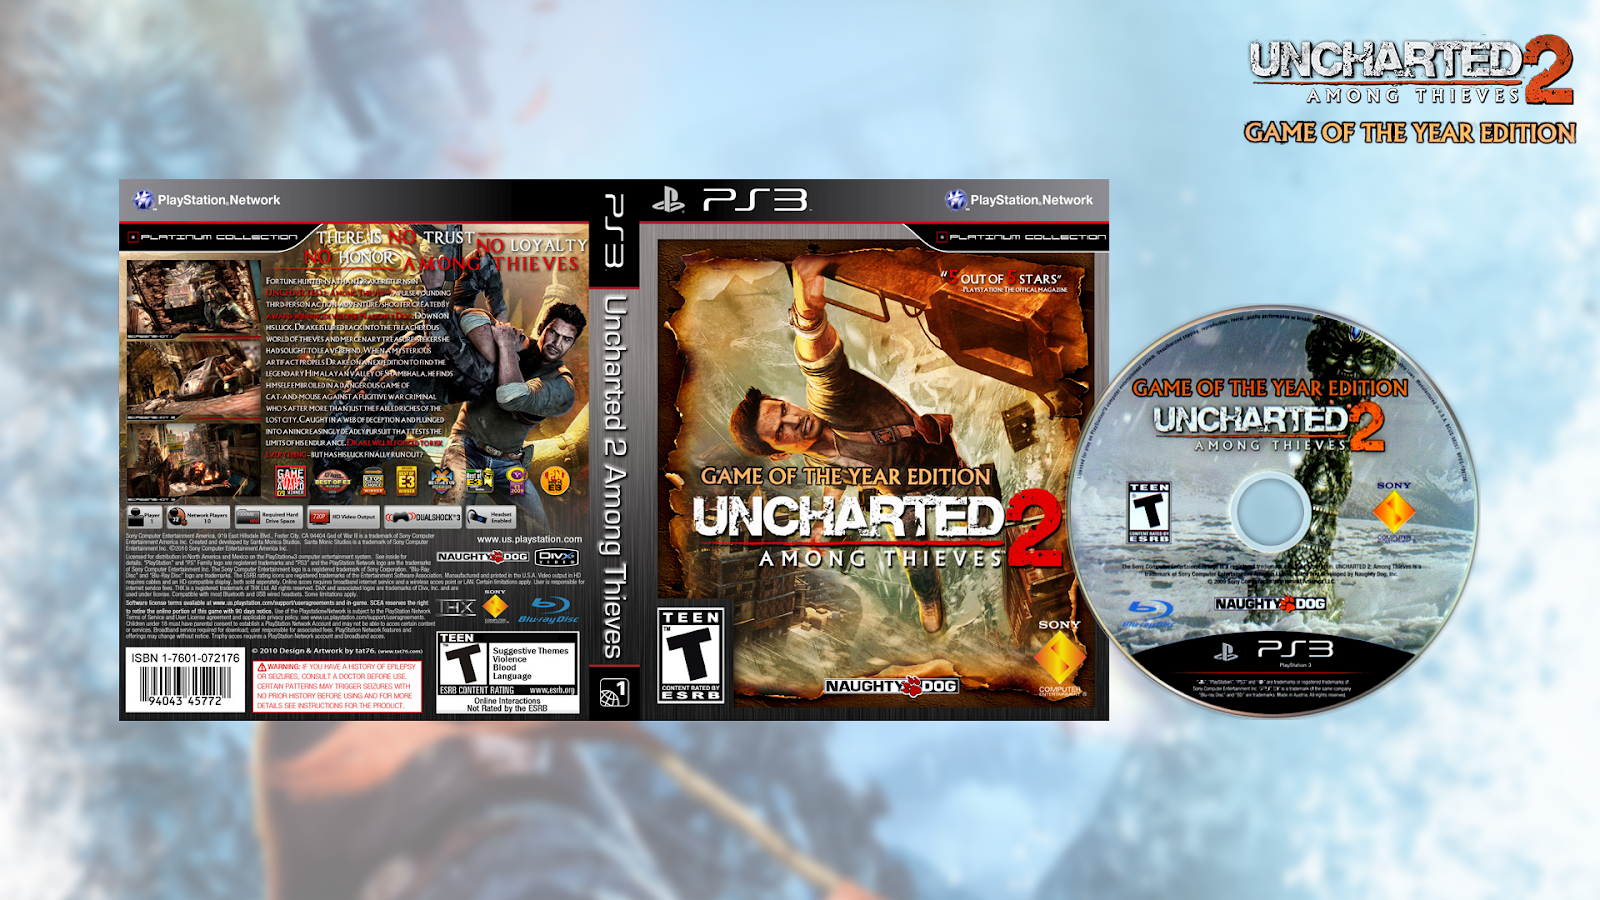 UNCHARTED 3 pc repack games free